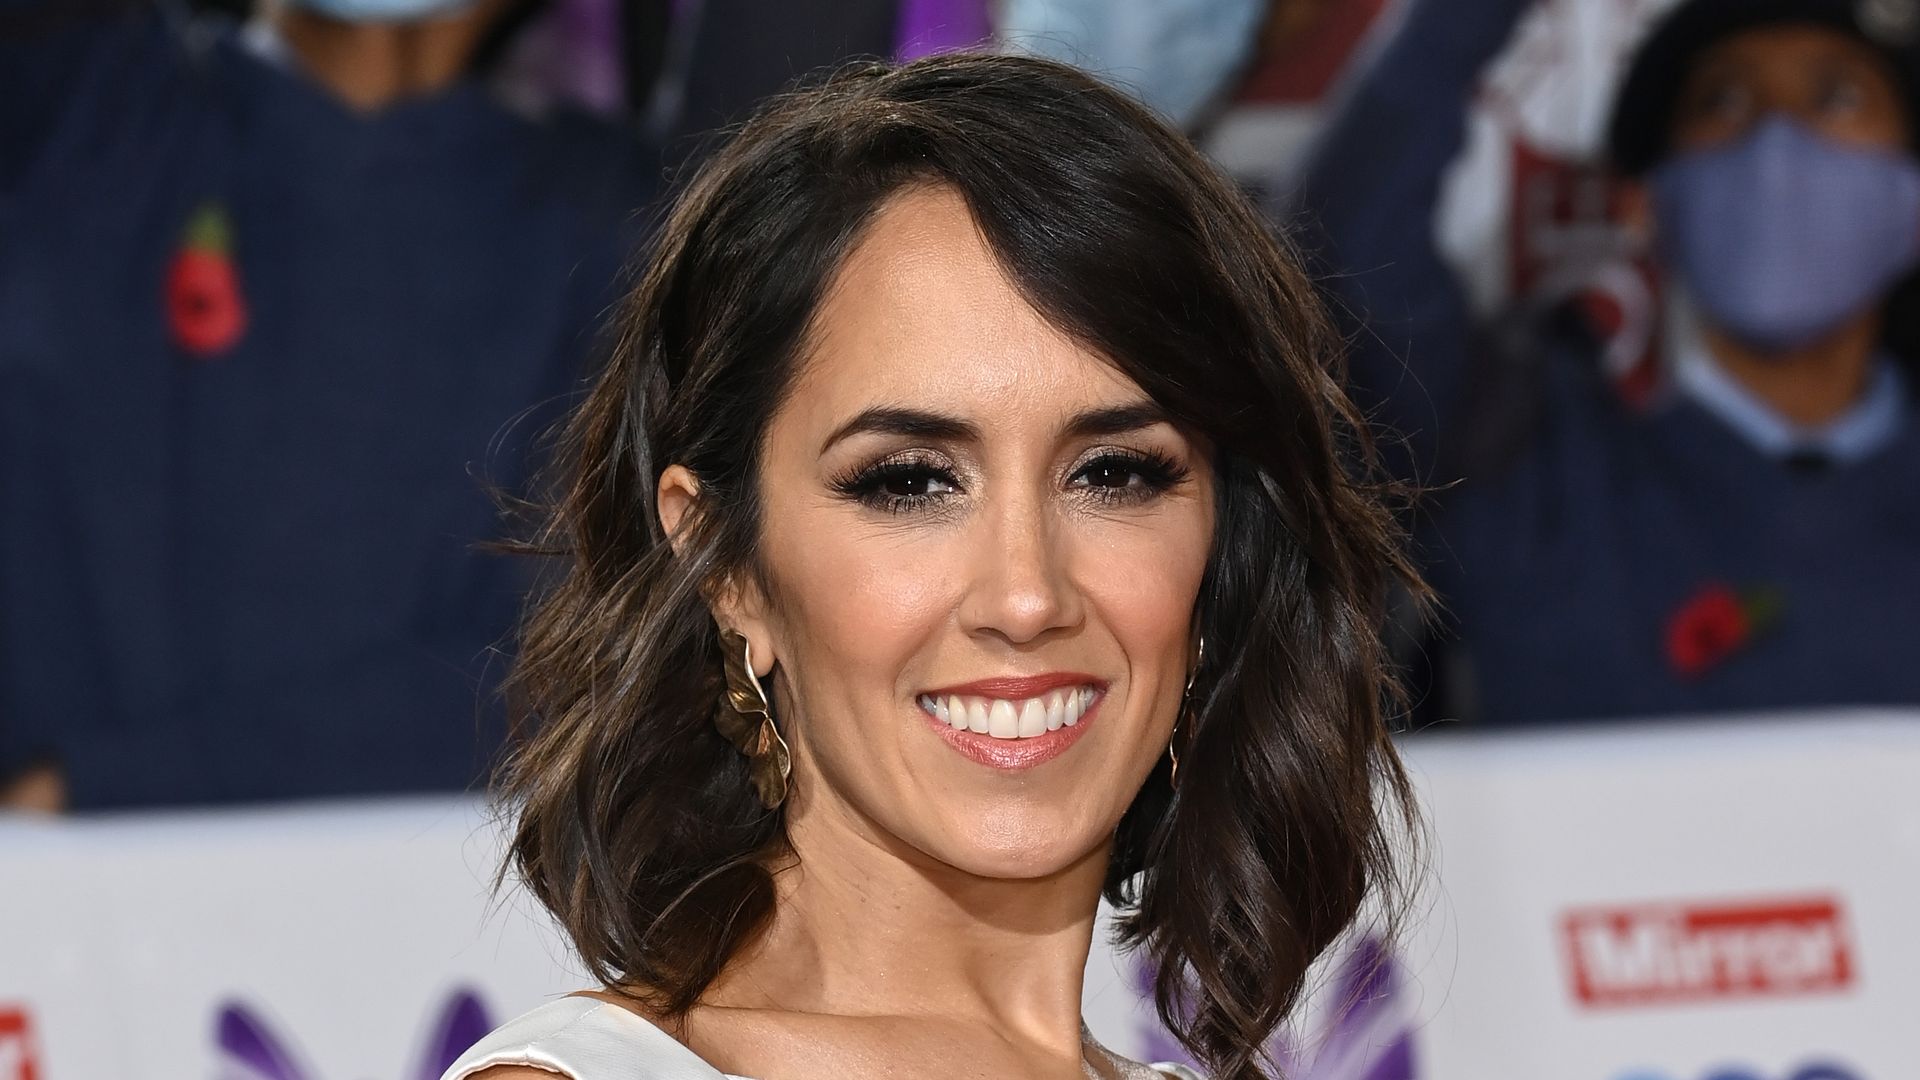 Janette Manrara on the red carpet at the Pride of Britain Awards